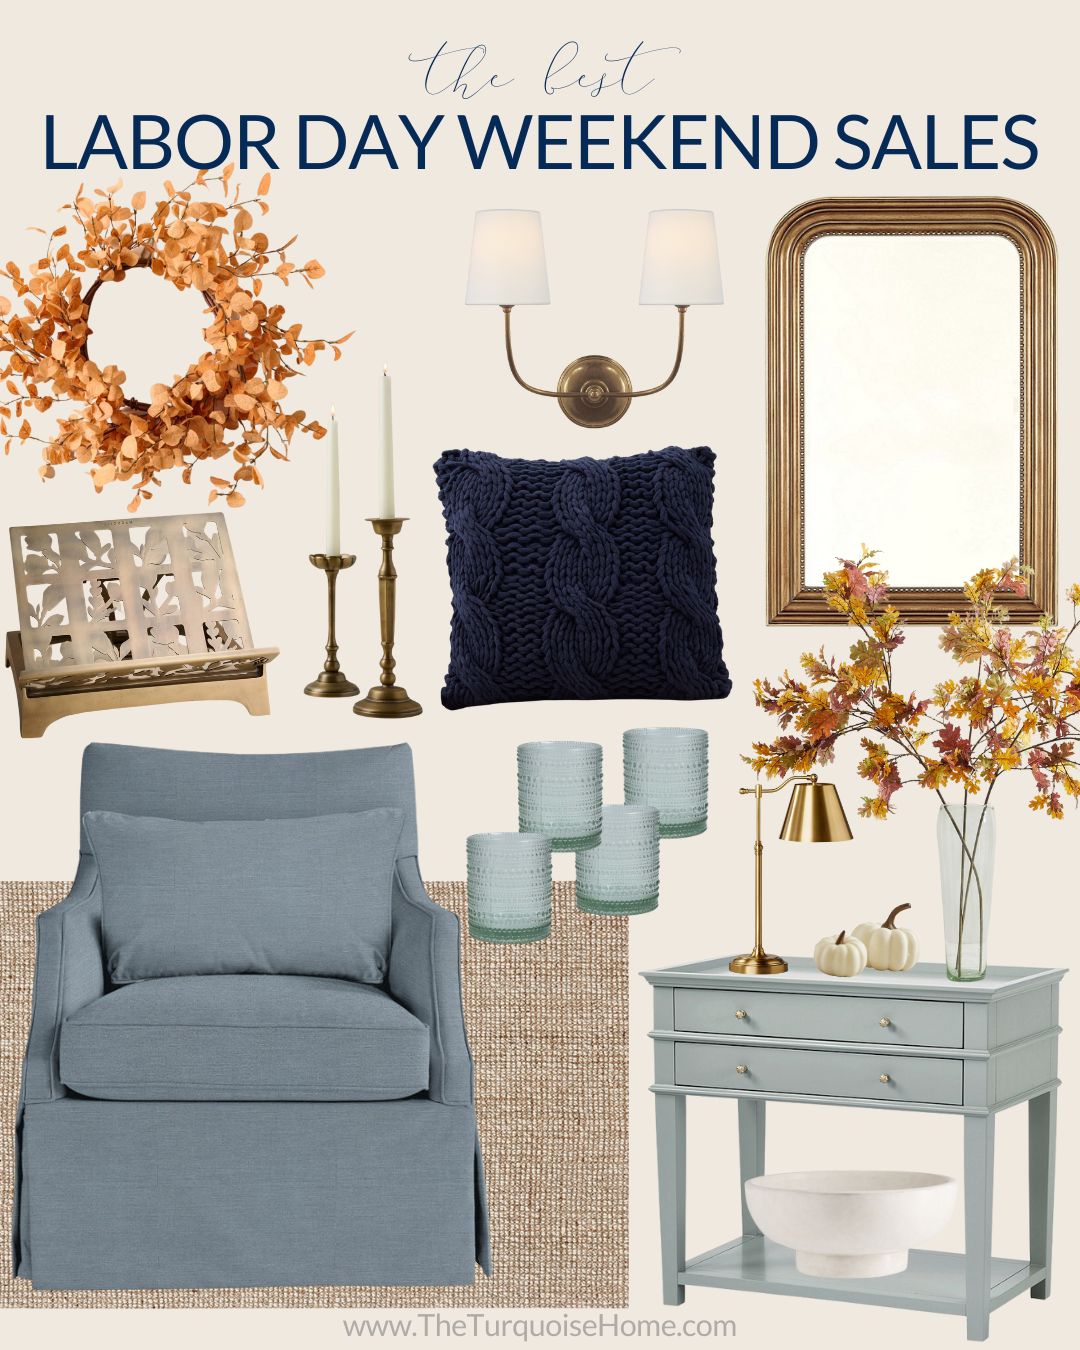 The Best Labor Day Weekend Sales!